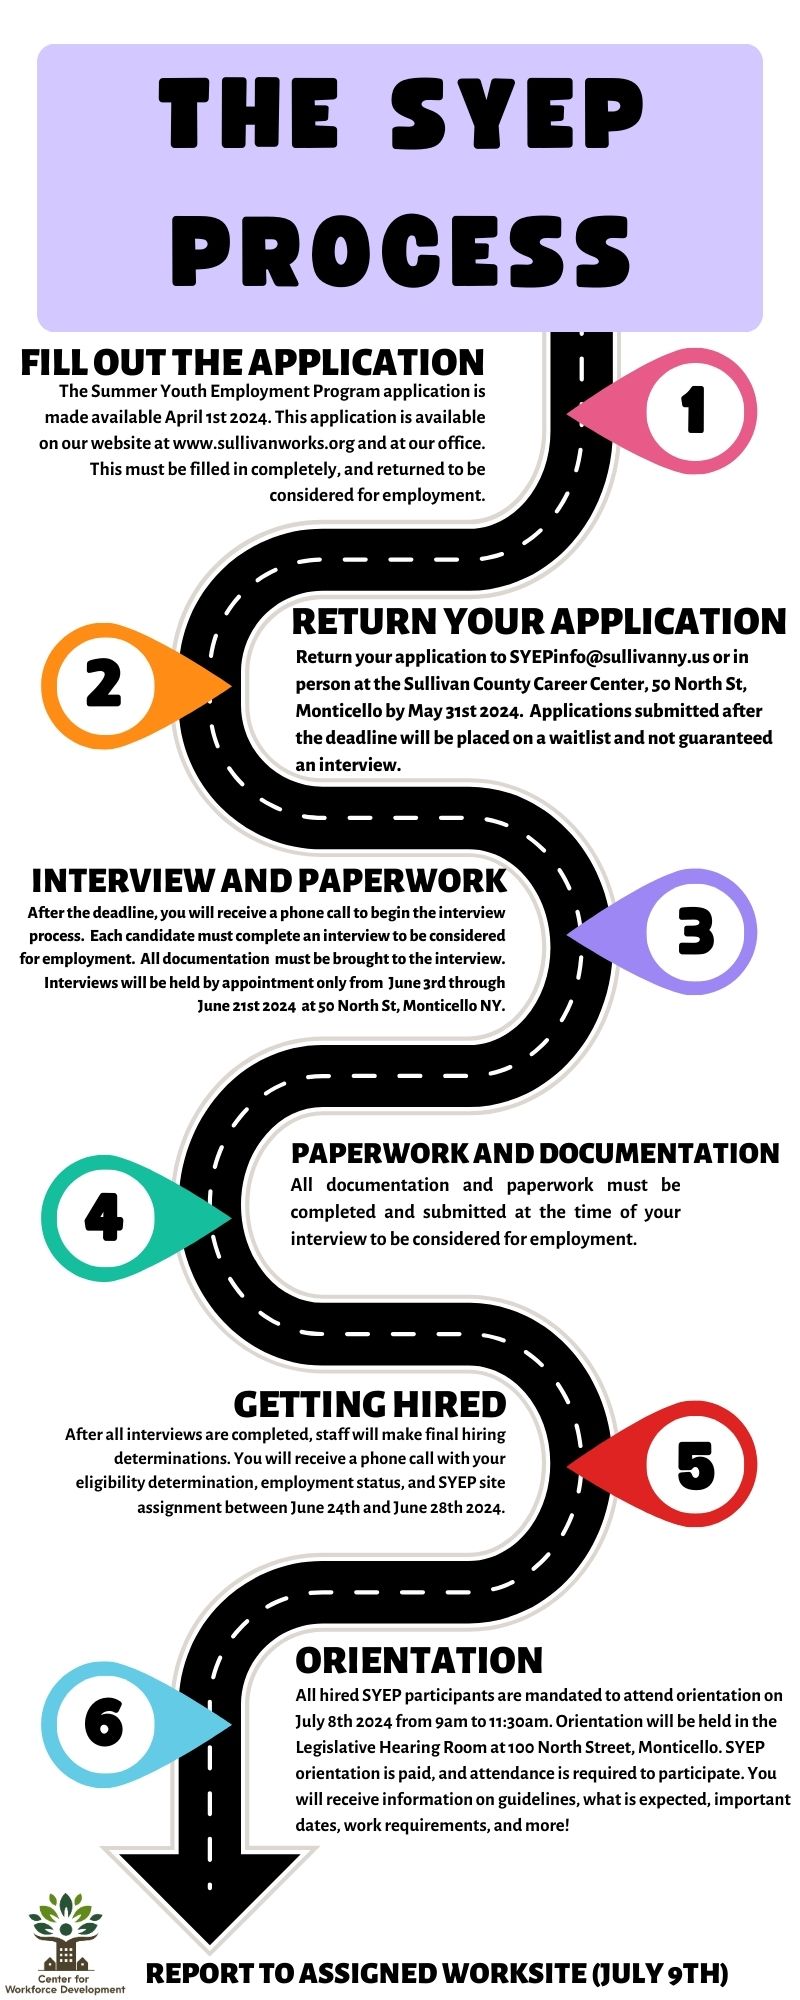 The SYEP Process: application, interview, paperwork, orientation, hire